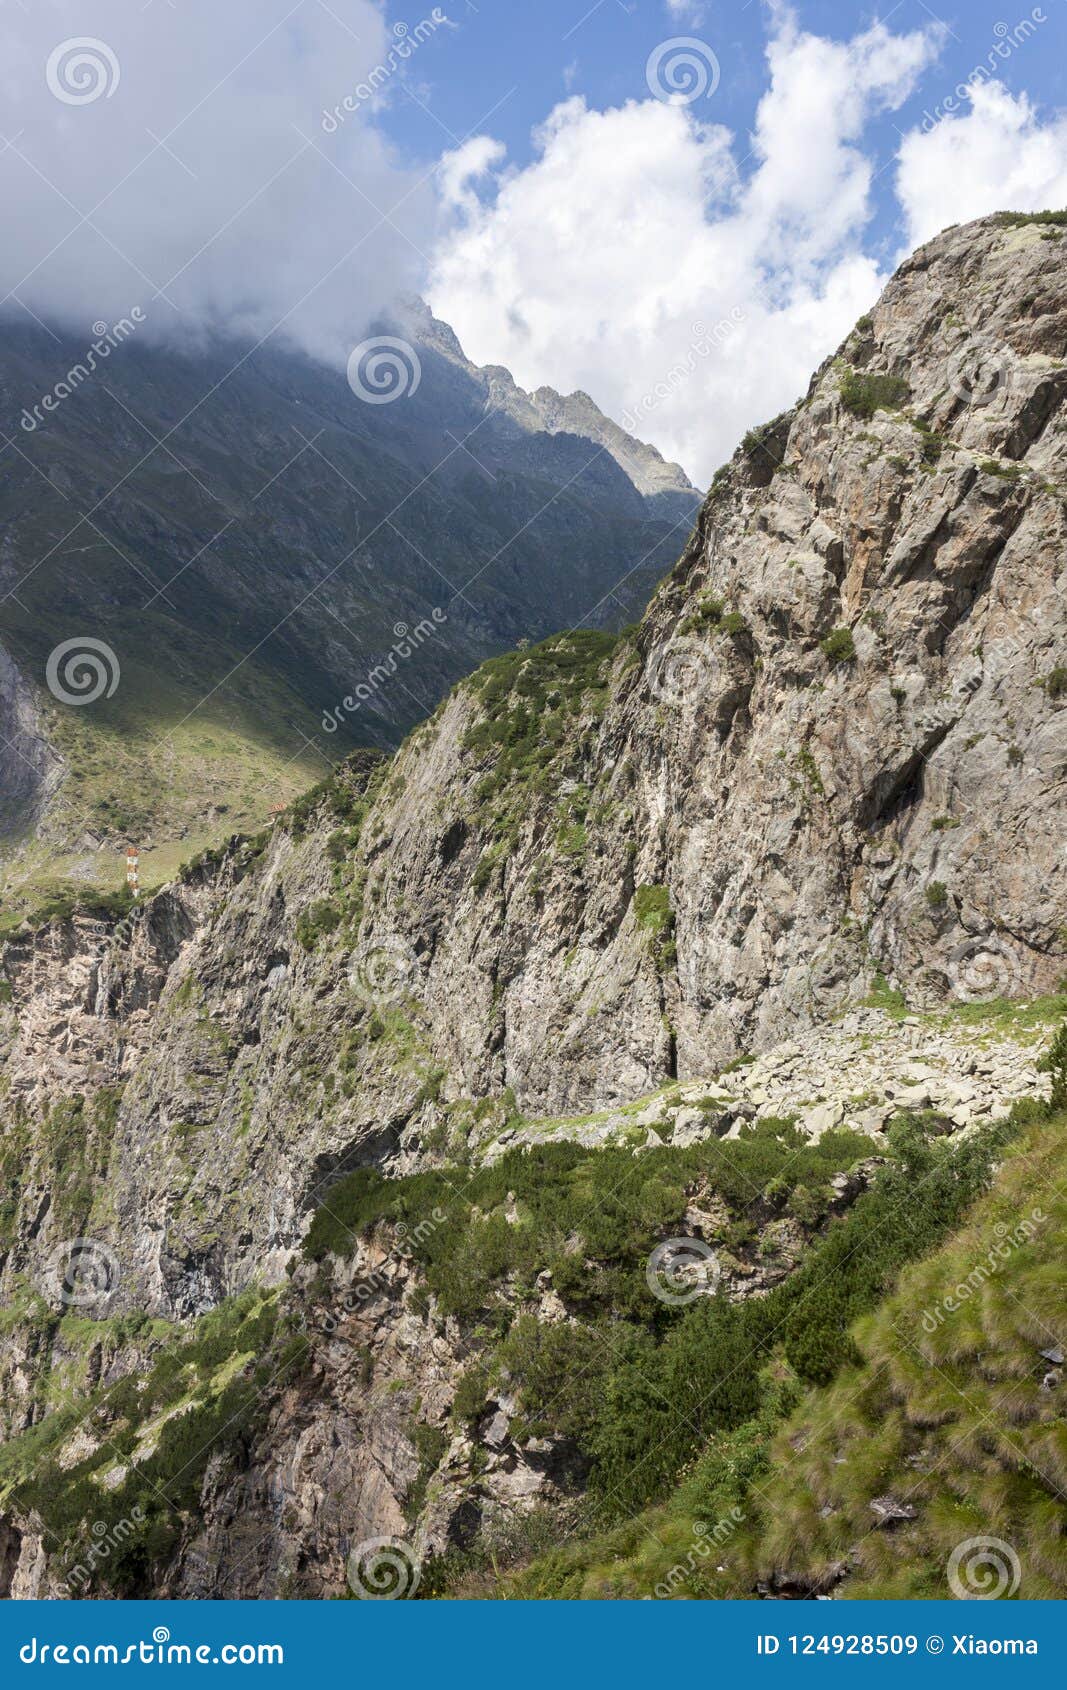 a view of the mountains above valbondione, in the upper seriana valley,